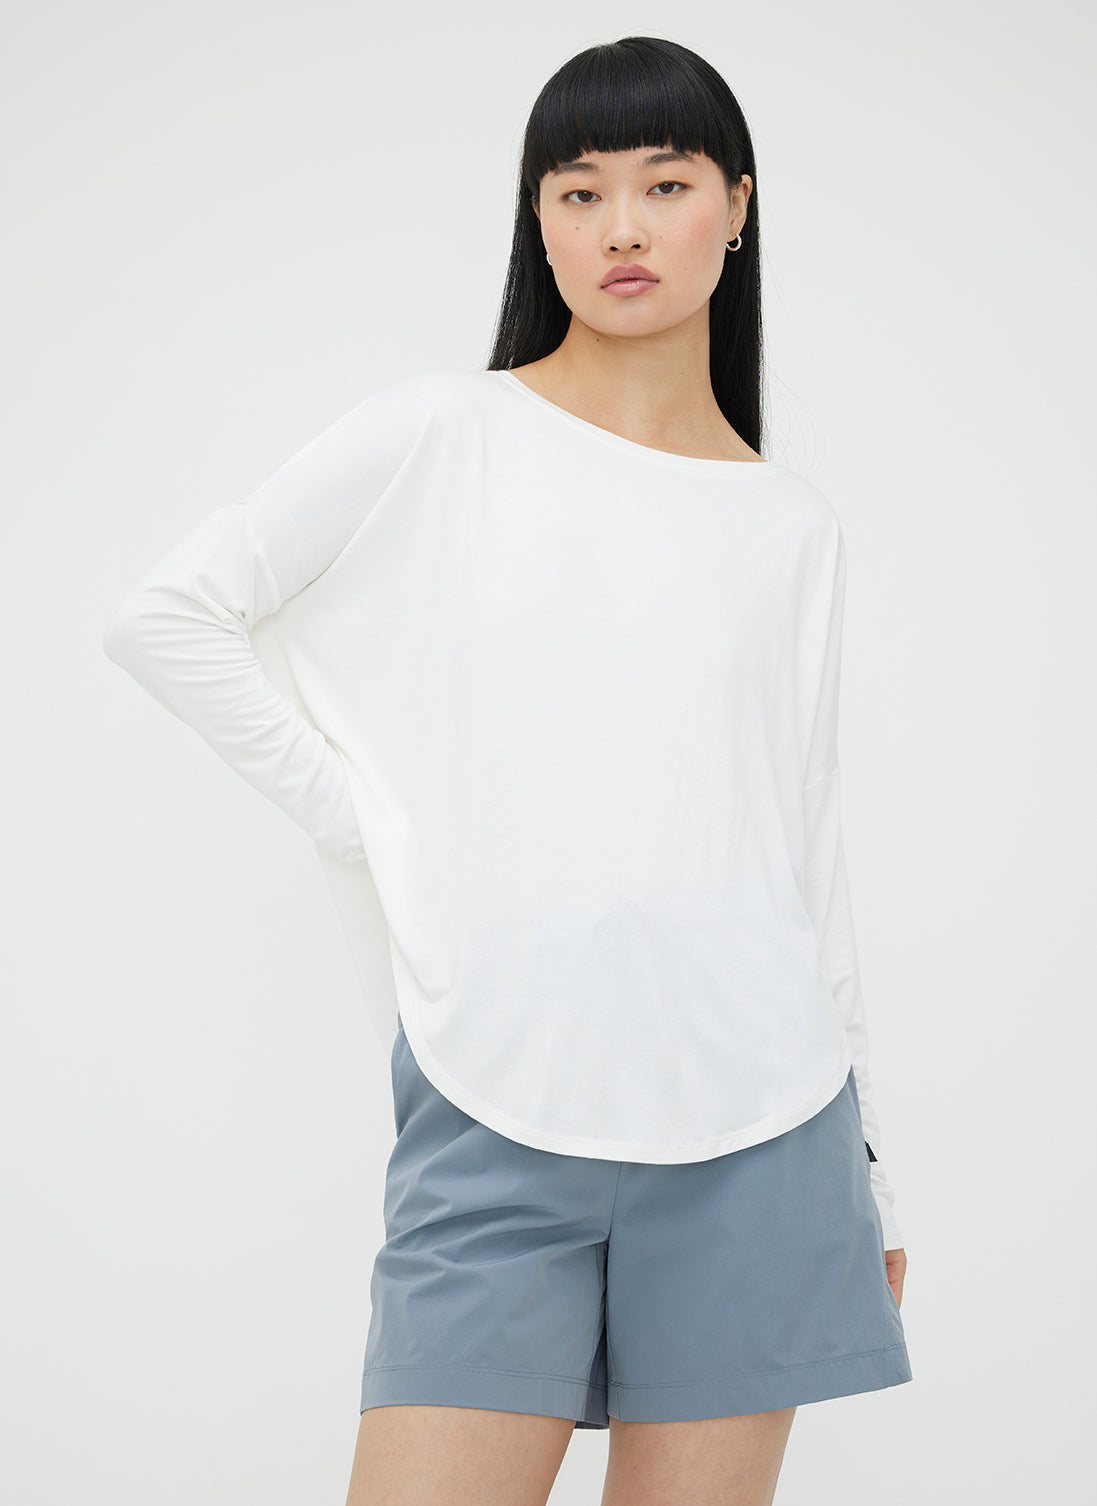 Women's Soft Lounge Fitted T-shirt